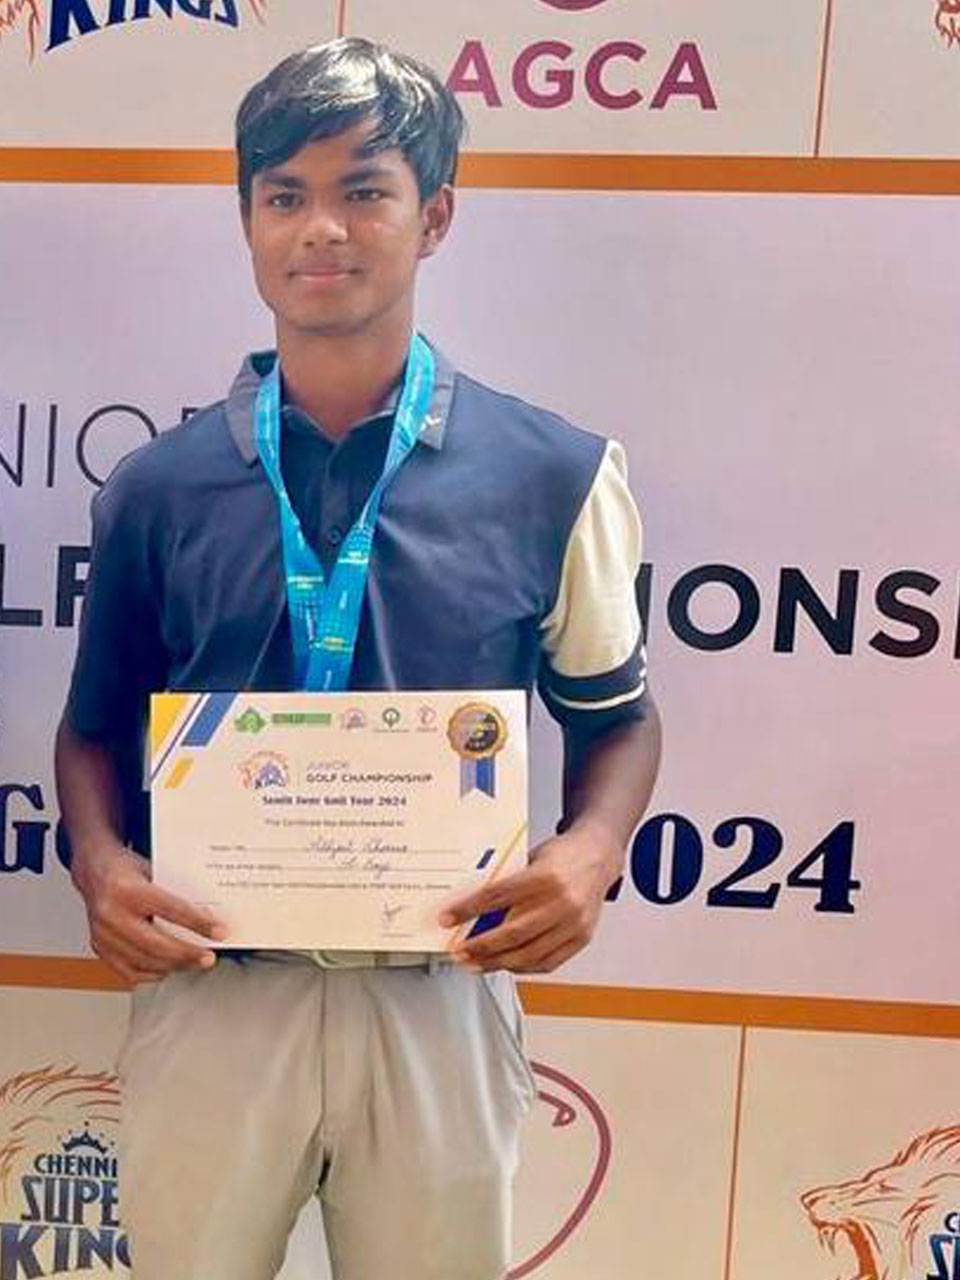 Abhijit Sharma finished 2nd in the 'A' Boys category at The Chennai South Zone tournament held at TNGF Cosmopolitan Golf Club in Chennai.
